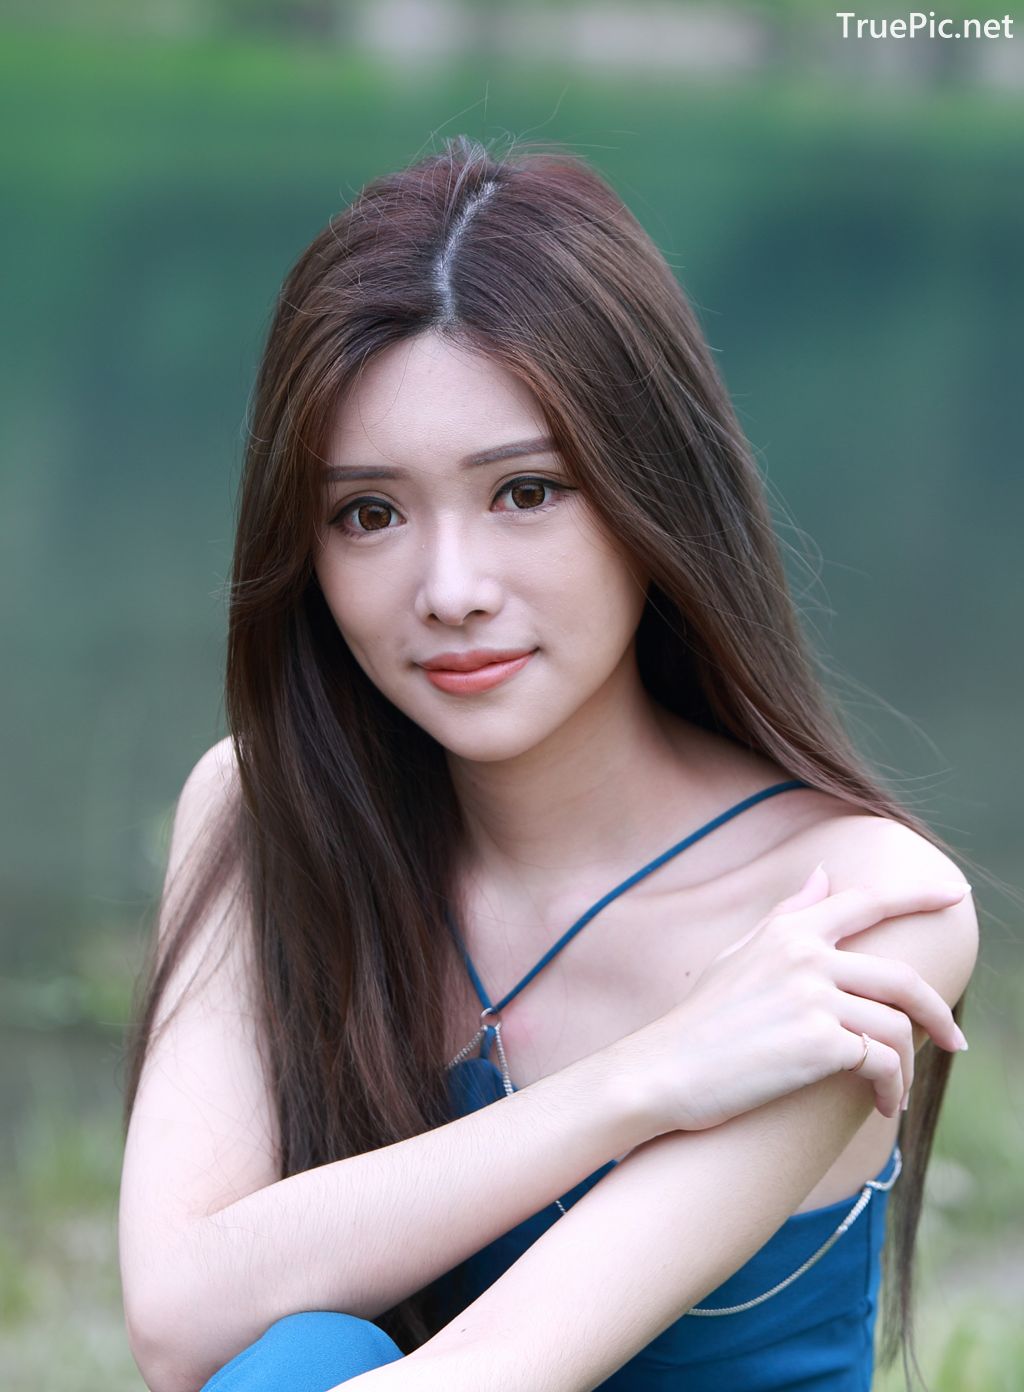 Image-Taiwanese-Pure-Girl-承容-Young-Beautiful-And-Lovely-TruePic.net- Picture-98